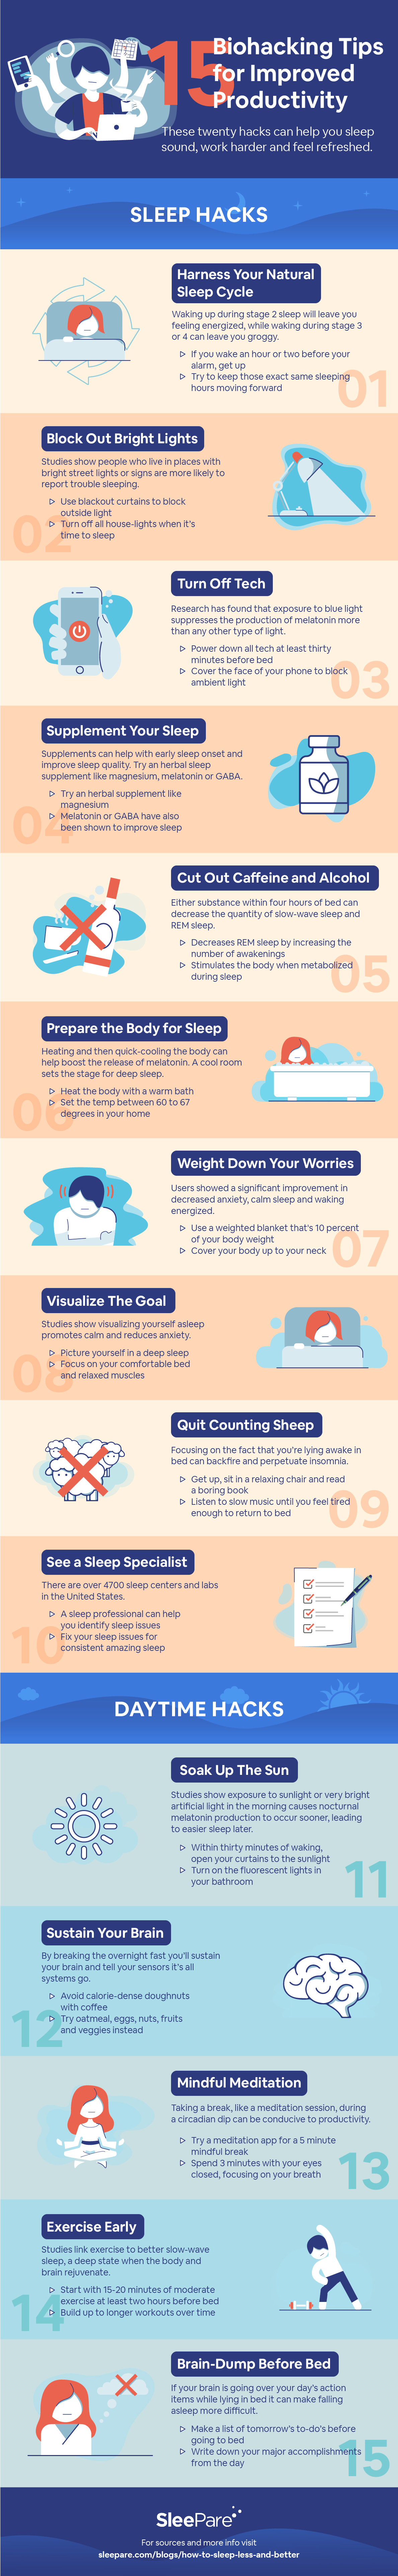 infographic with tips that show how to sleep less and better